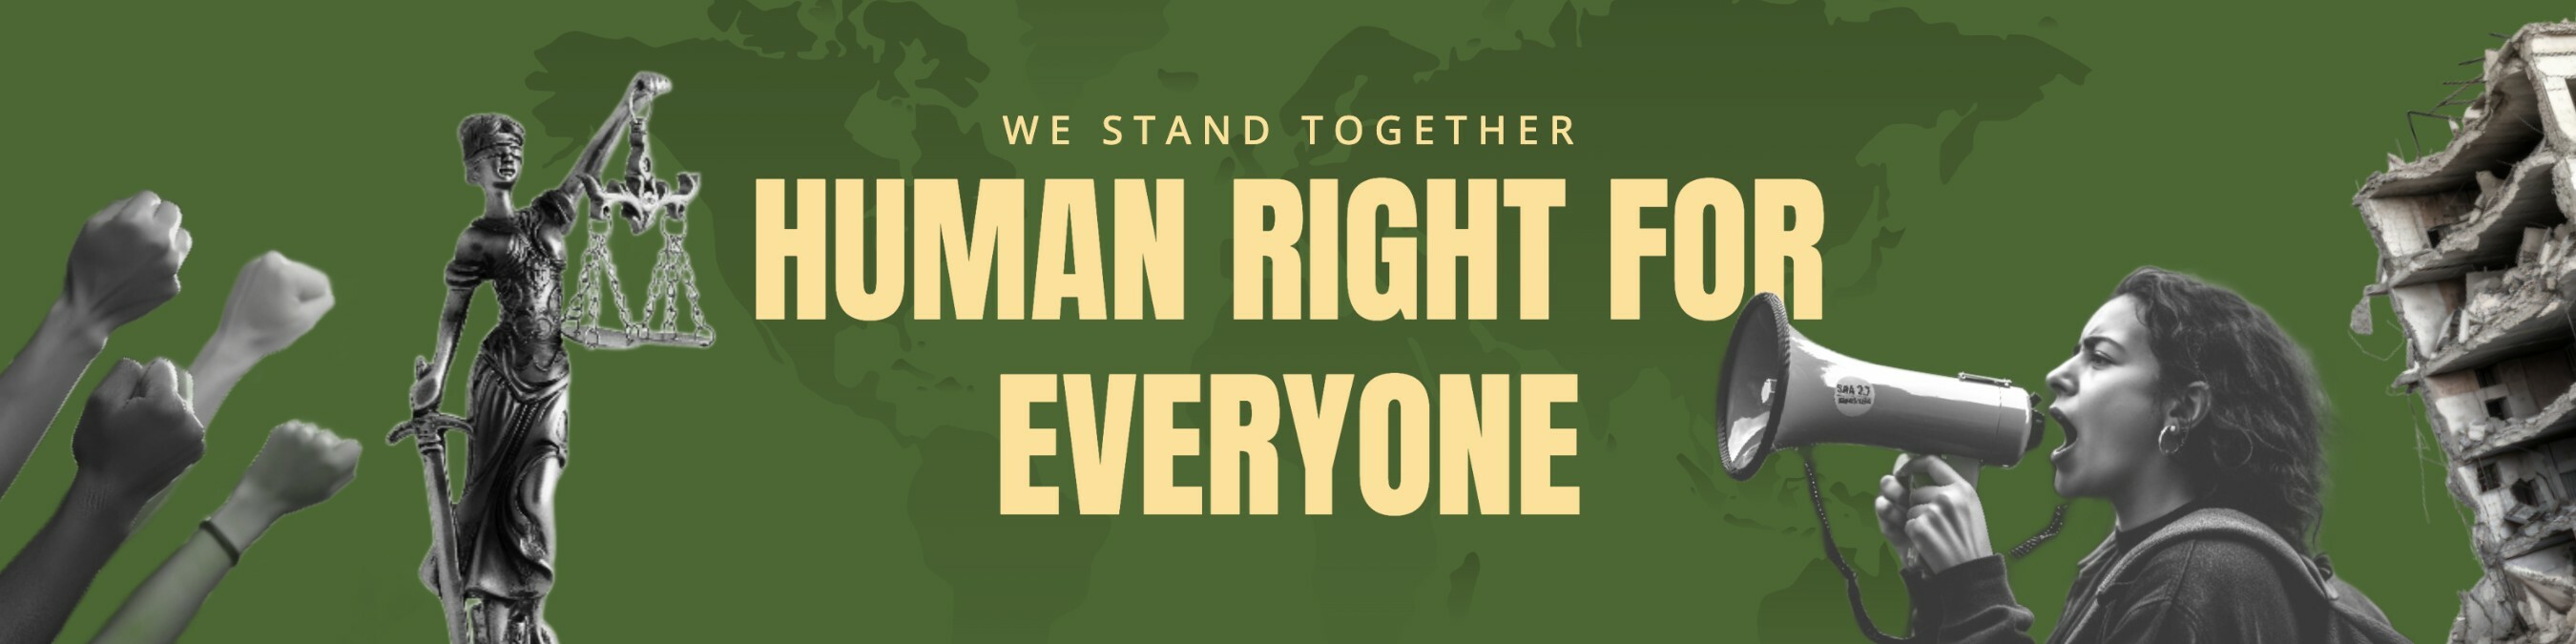 human right social media banner in green and yellow